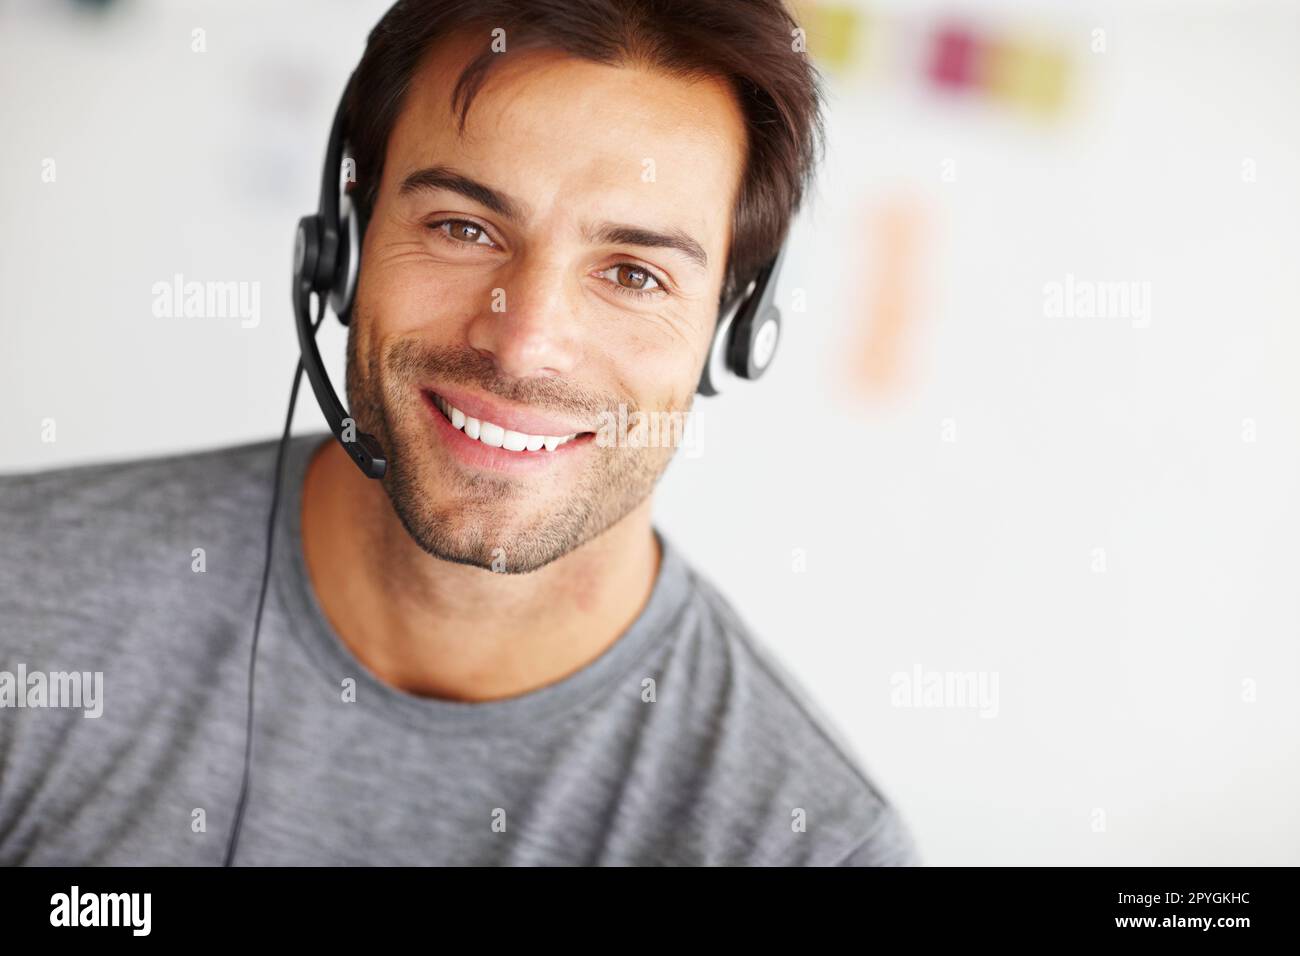 On the line to help. Closeup portrait of a handsome young man wearing a headset and smiling at the camera. Stock Photo